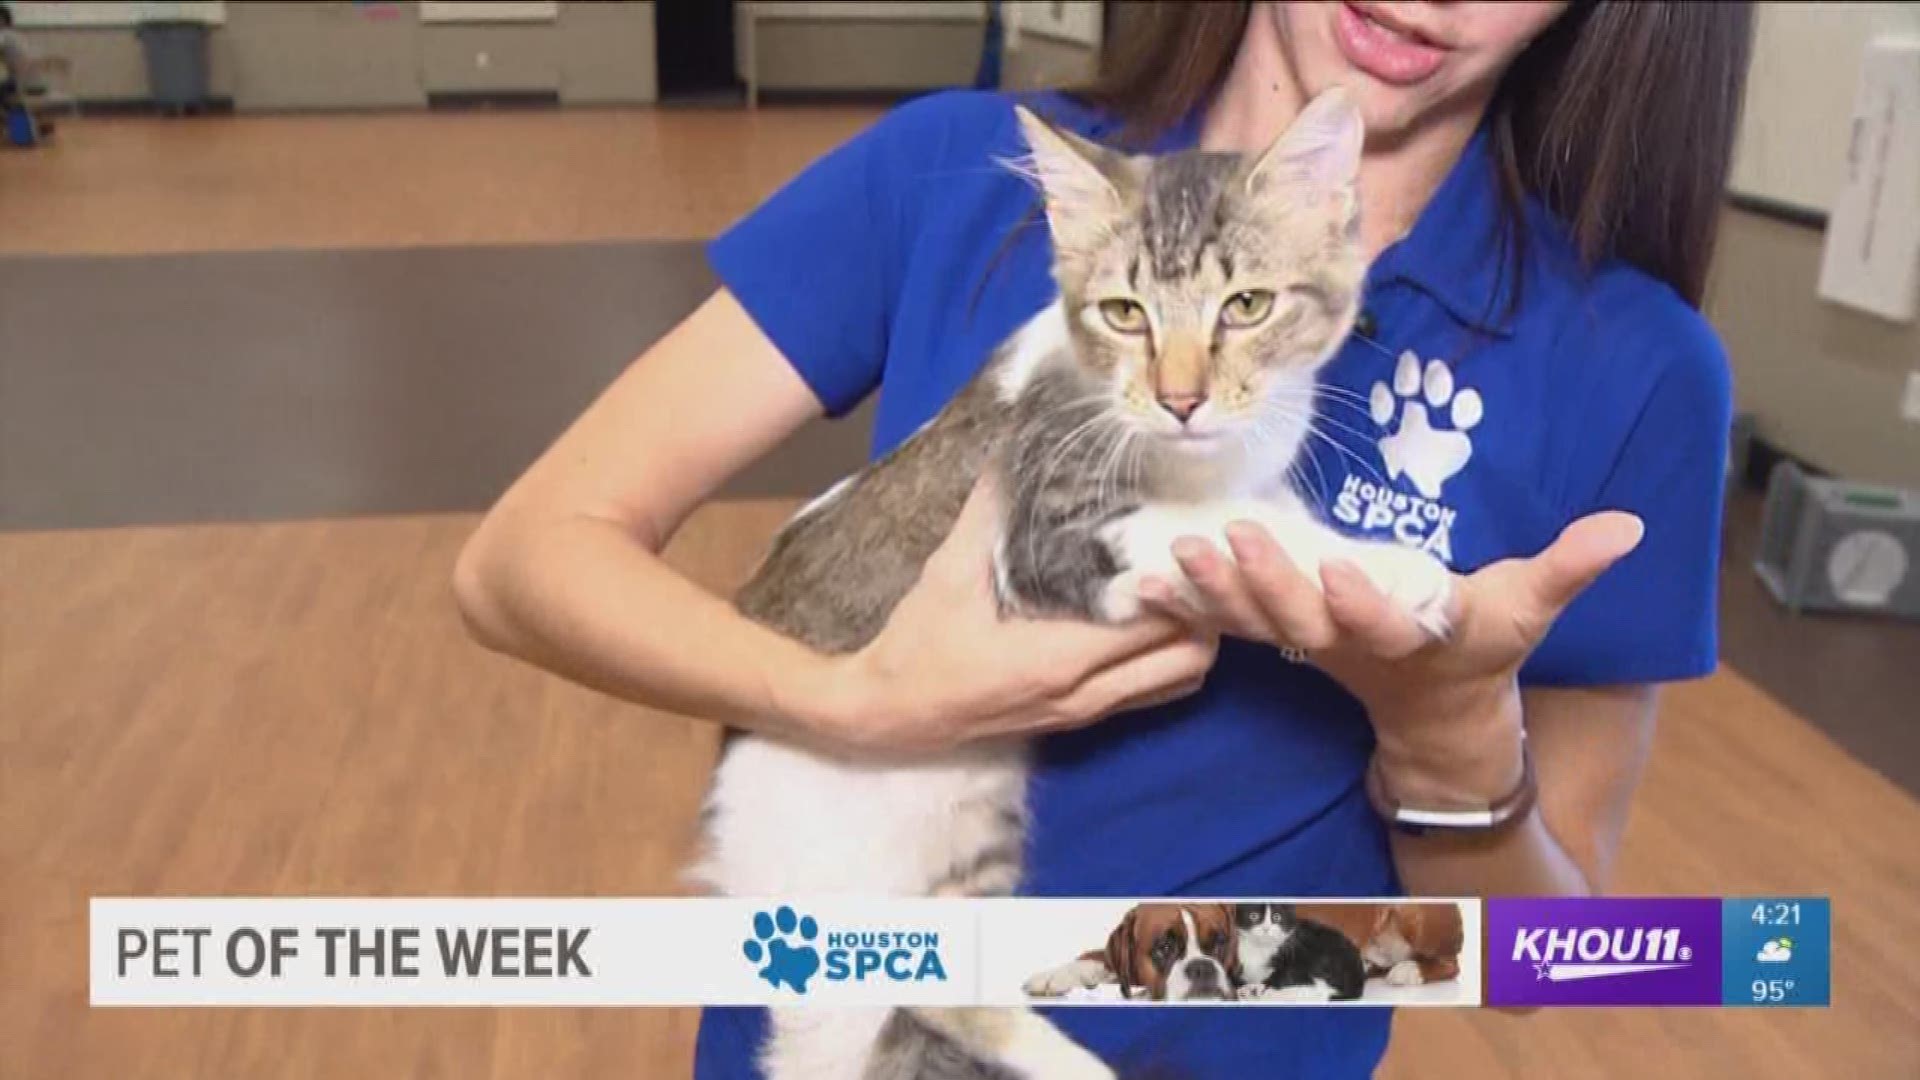 Our Pet of the Week is a beautiful kitten named Deanna. She's very friendly and even gets along with dogs. For more information on Deanna and other homeless pets, go to Houstonspca.org